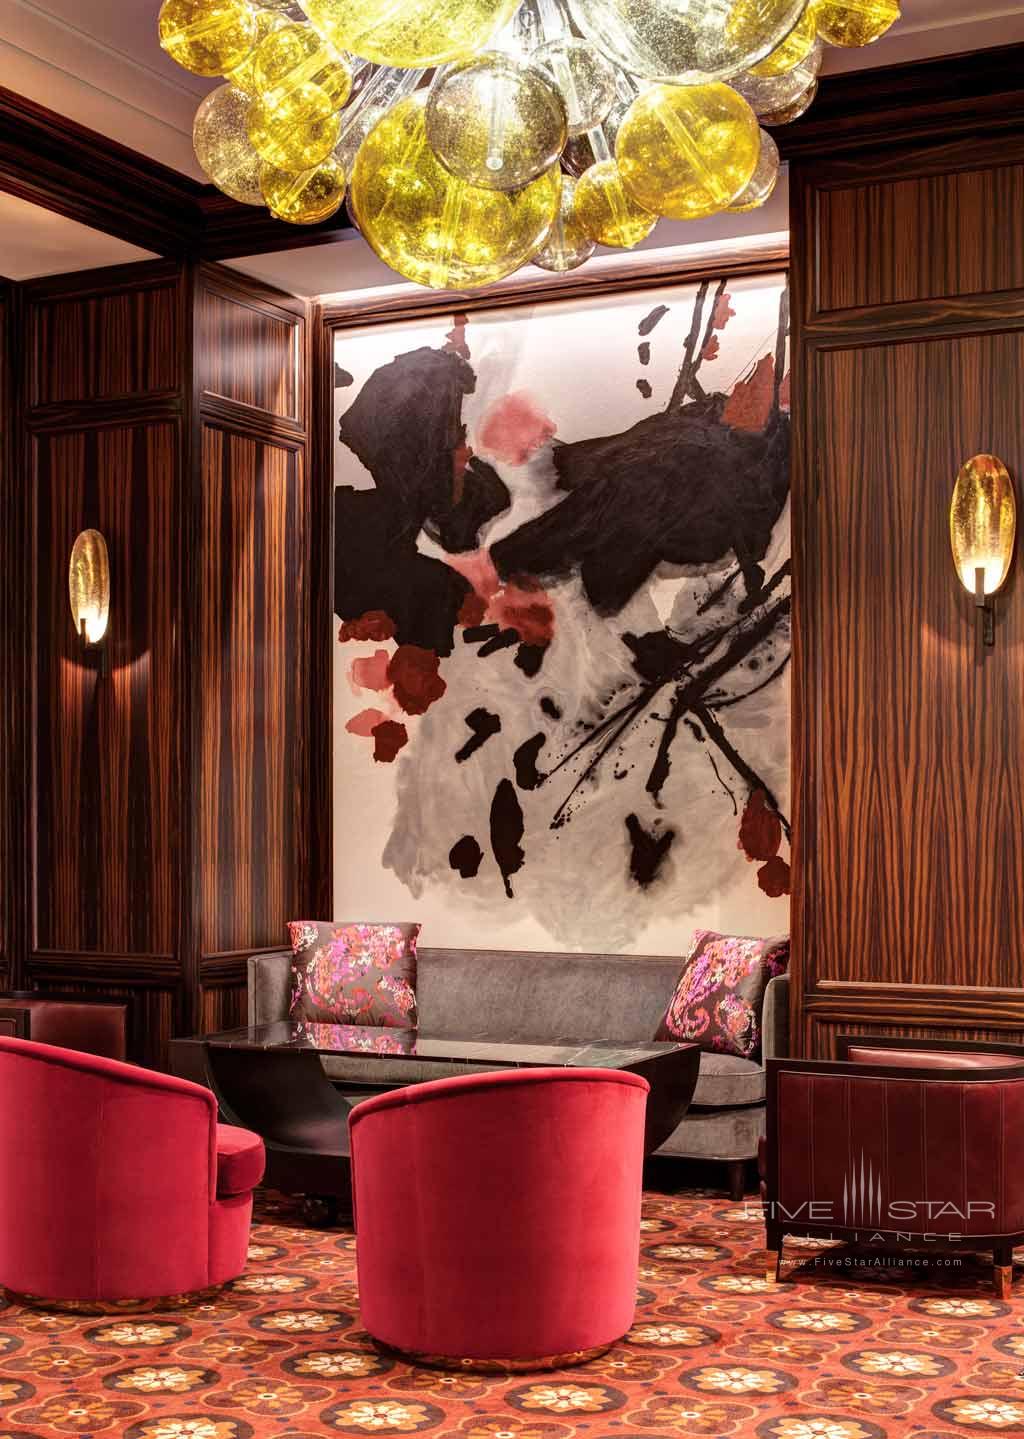 Lobby and Lounge Seating Area at The Lotte New York Palace, New York, NY